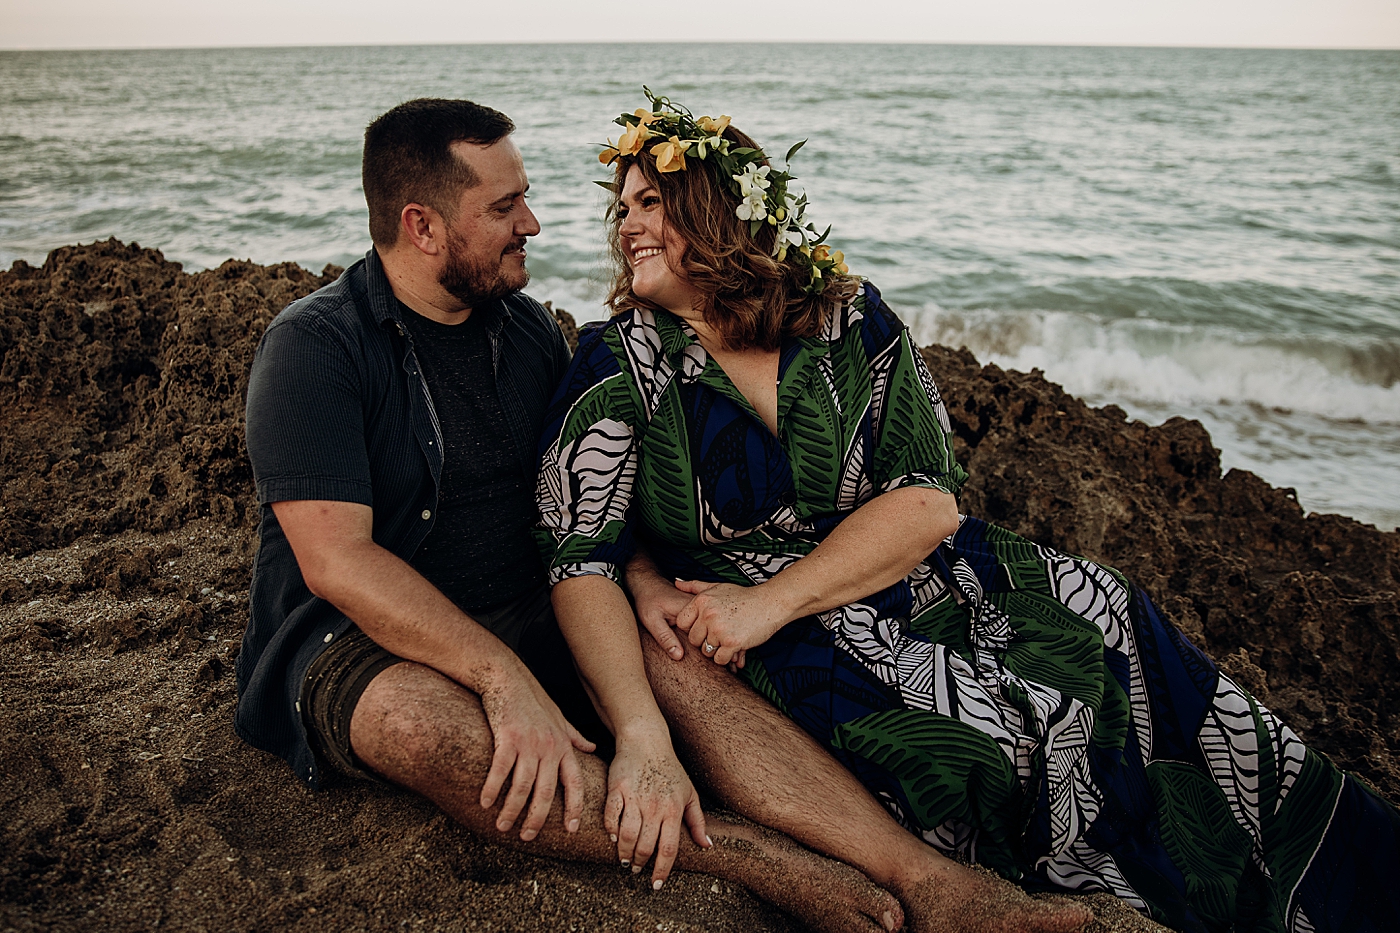 Couple sitting on rock and holding each other looking at each other House of Refuge Engagement Photography captured by Maggie Alvarez Photography